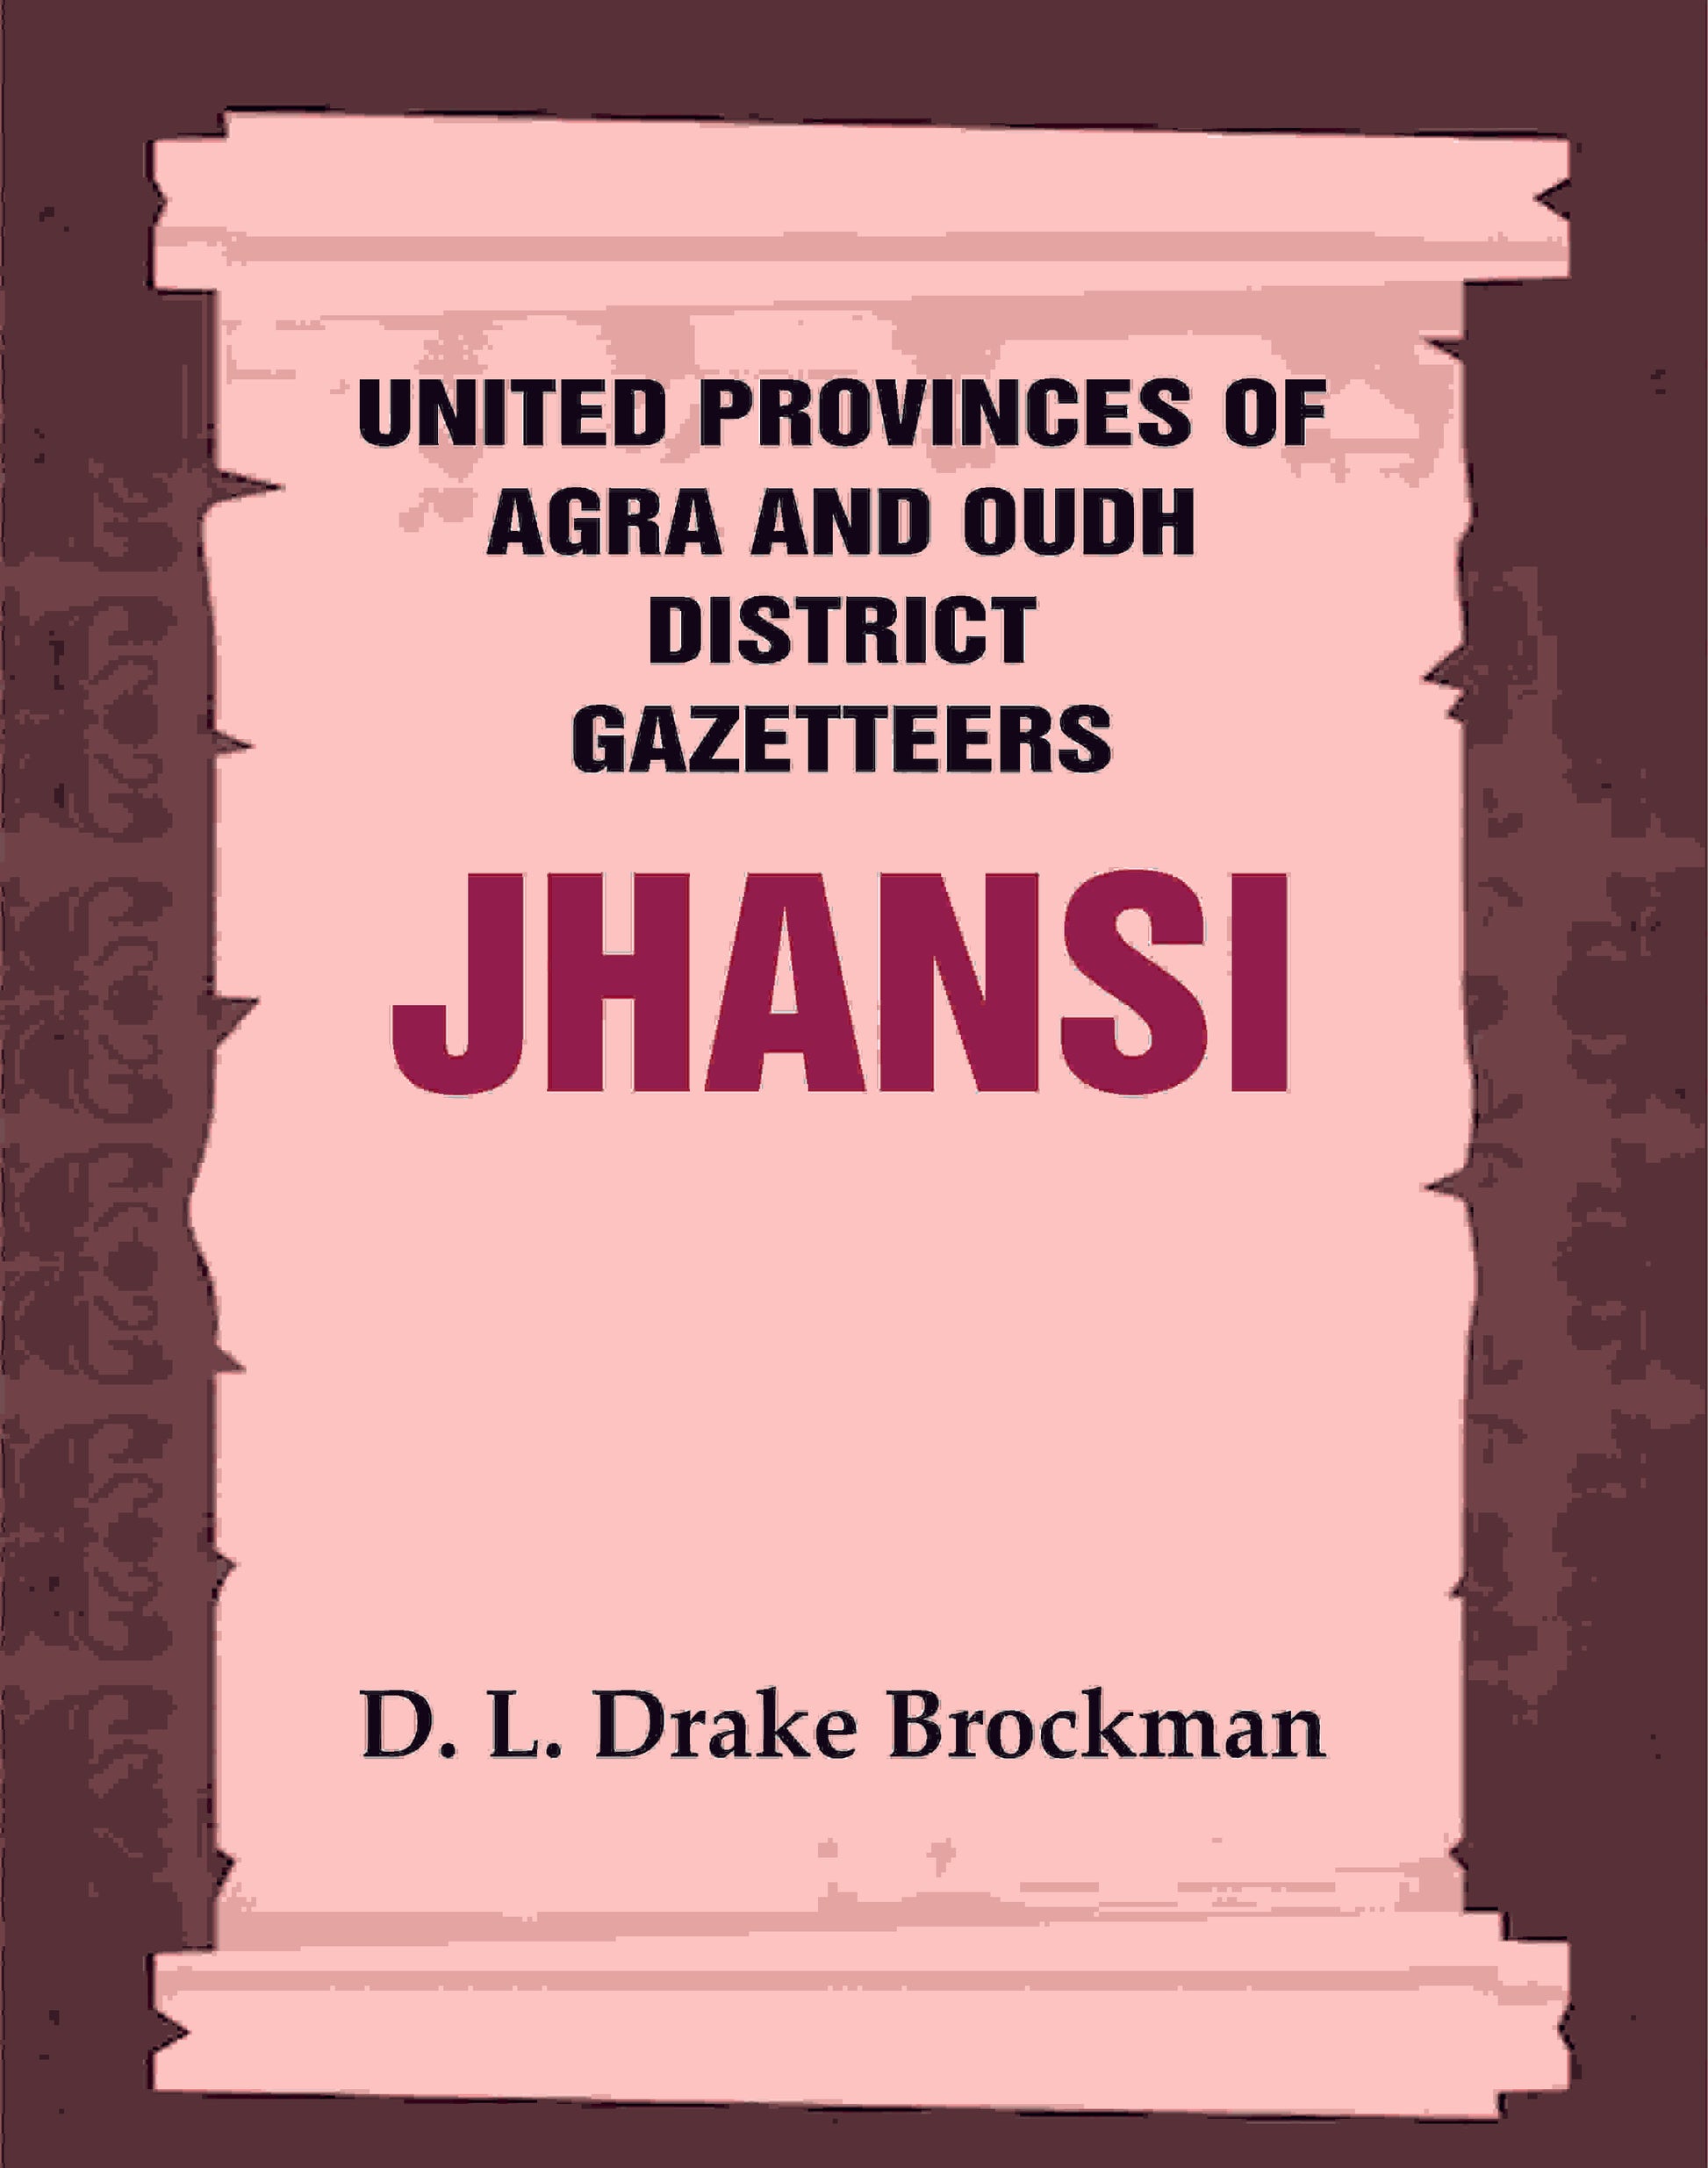 United Provinces of Agra and Oudh District Gazetteers: Jhansi